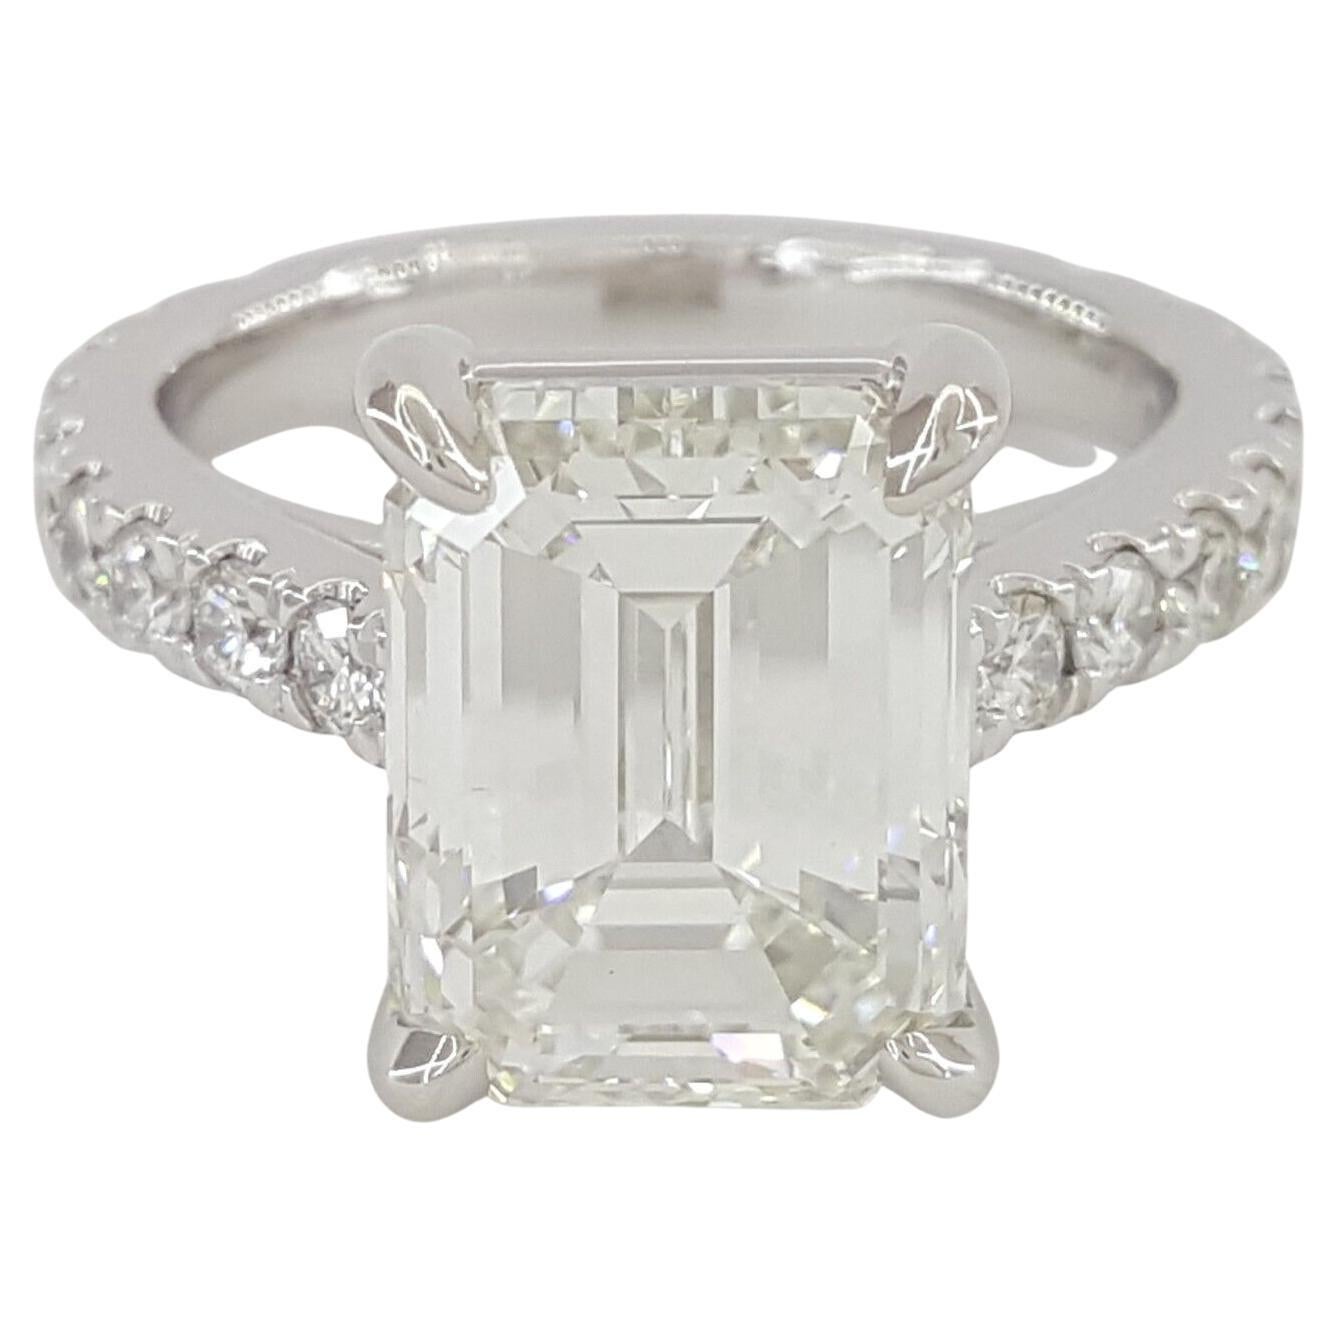 GIA Certified 4.02 Carat Emerald Cut Diamond Solitaire Ring with pavè